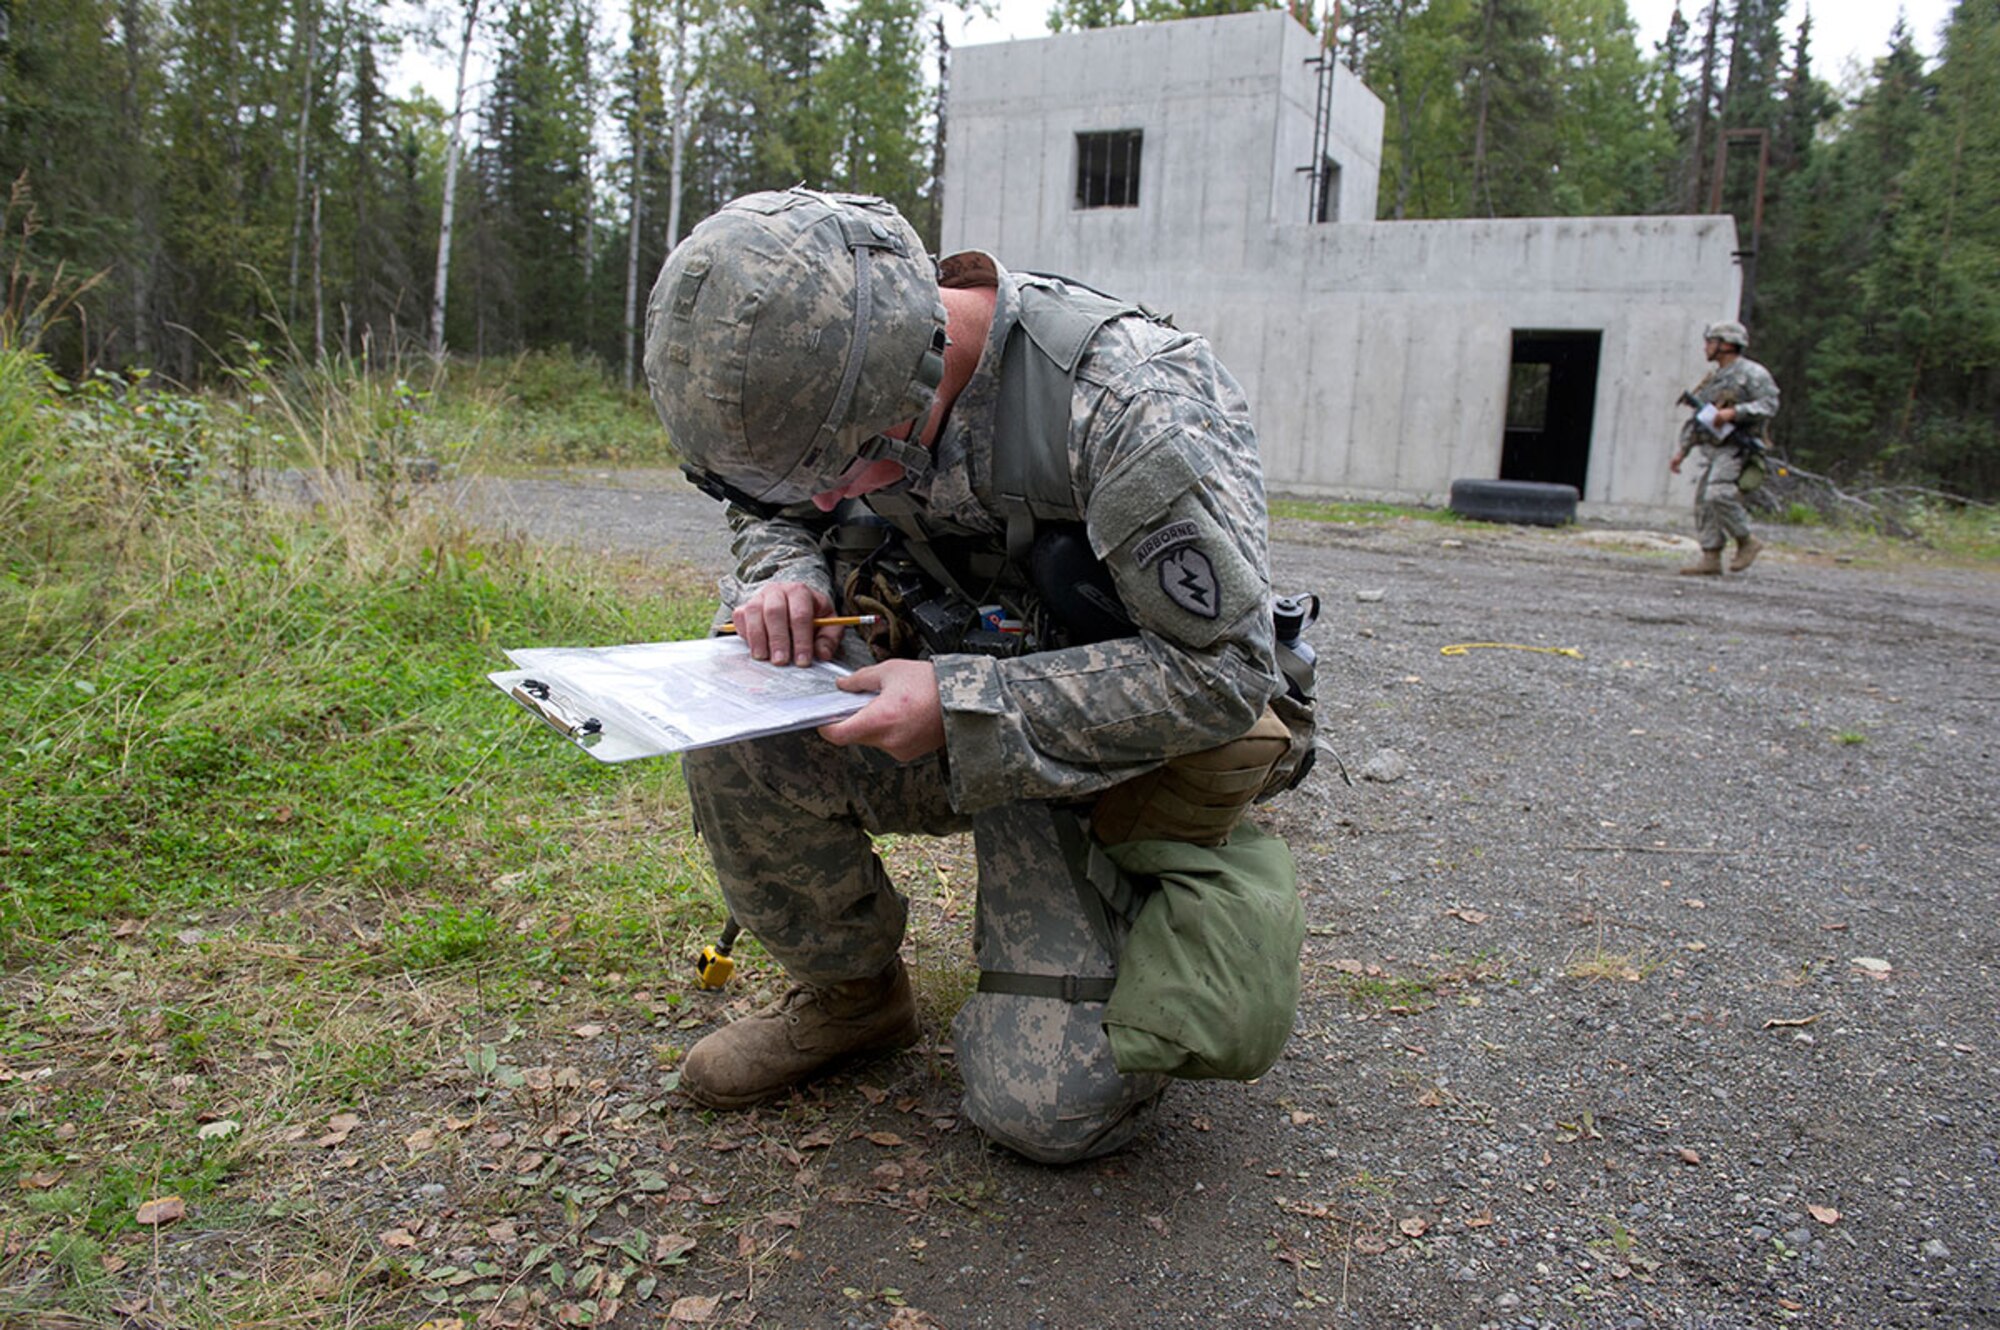 Spc. Nathan Hines, a native of Newberry, Mich., assigned to Baker Company, 3rd Battalion (Airborne), 509th Infantry Regiment, 4th Infantry Brigade Combat Team (Airborne), 25th Infantry Division, U.S. Army Alaska, plots a point on a map on the land navigation course during Expert Infantryman Badge qualification on Joint Base Elmendorf-Richardson, Tuesday, Sept. 9, 2014. The Expert Infantryman Badge was approved by the Secretary of War on October 7, 1943, and is currently awarded to U.S. Army personnel who hold infantry or special forces military occupational specialties and successfully pass the rigors of the course. (U.S. Air Force photo/Justin Connaher)